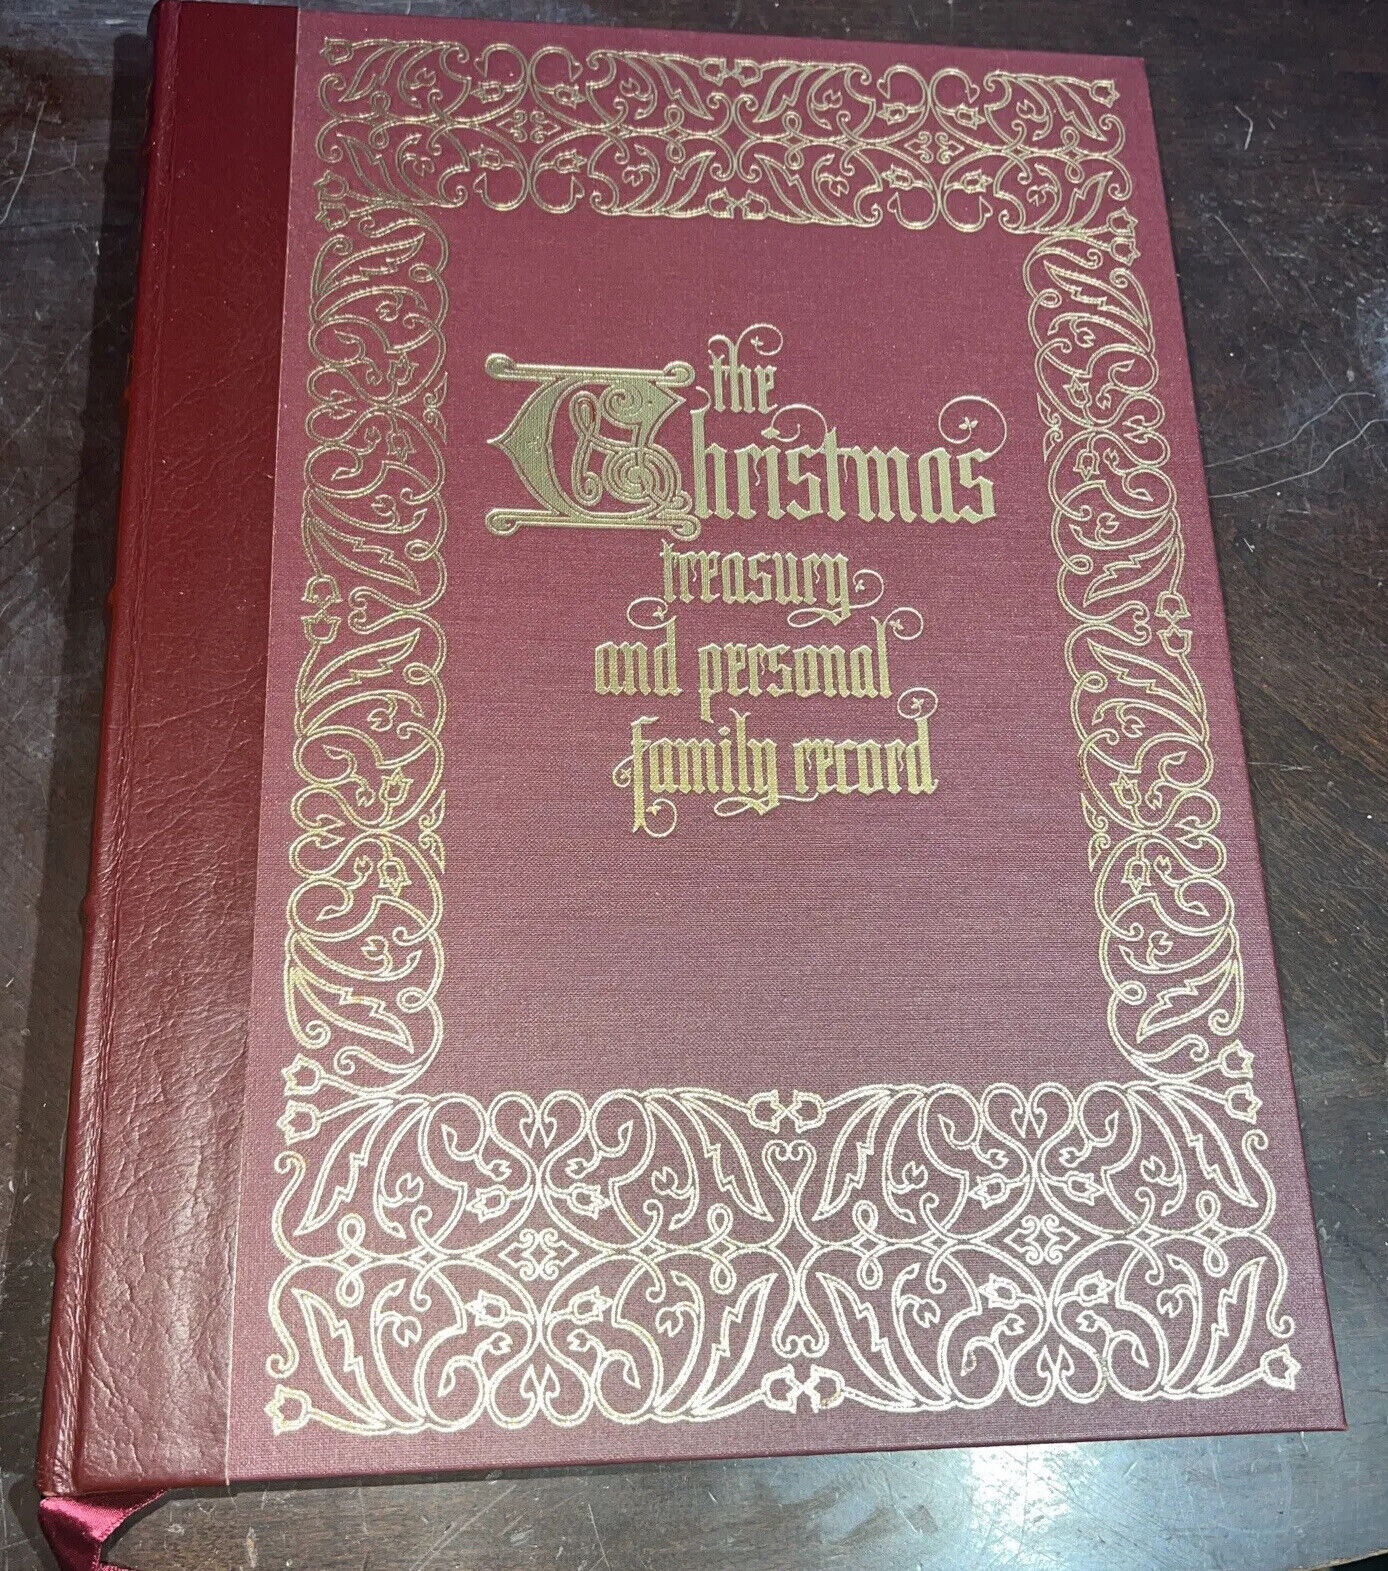 Franklin Library The Christmas Treasury And Personal Family Record 1979 Hardback